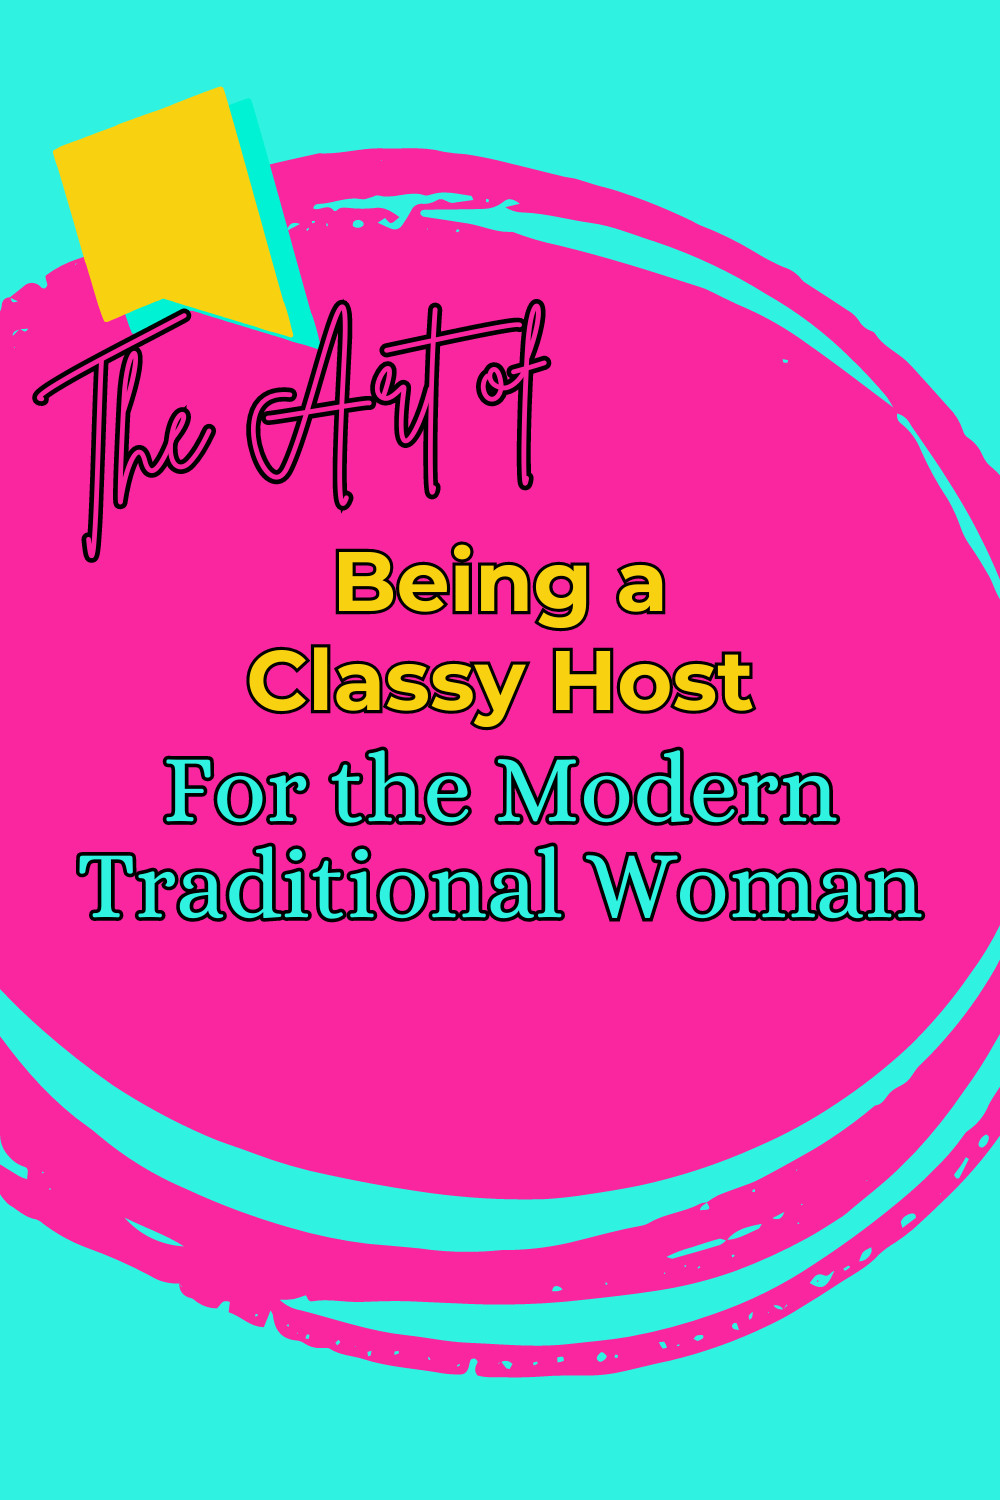 The Art of Being a Classy Host for the Modern Traditional Woman